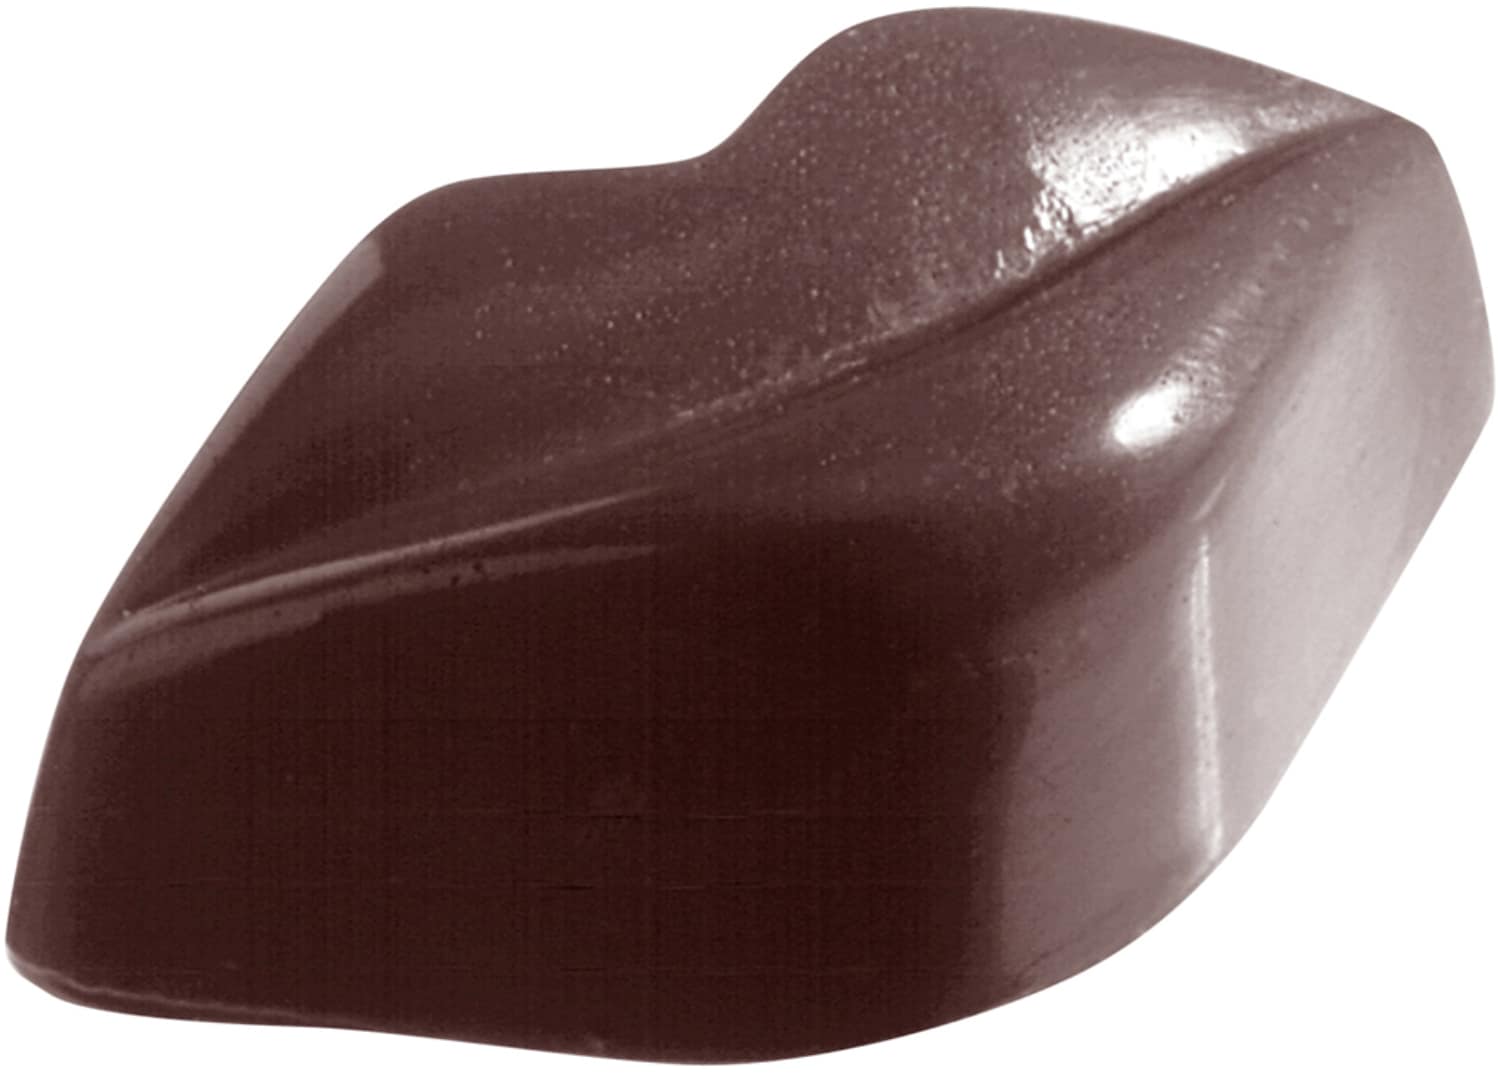 Chocolate mould "Mouth" 421296